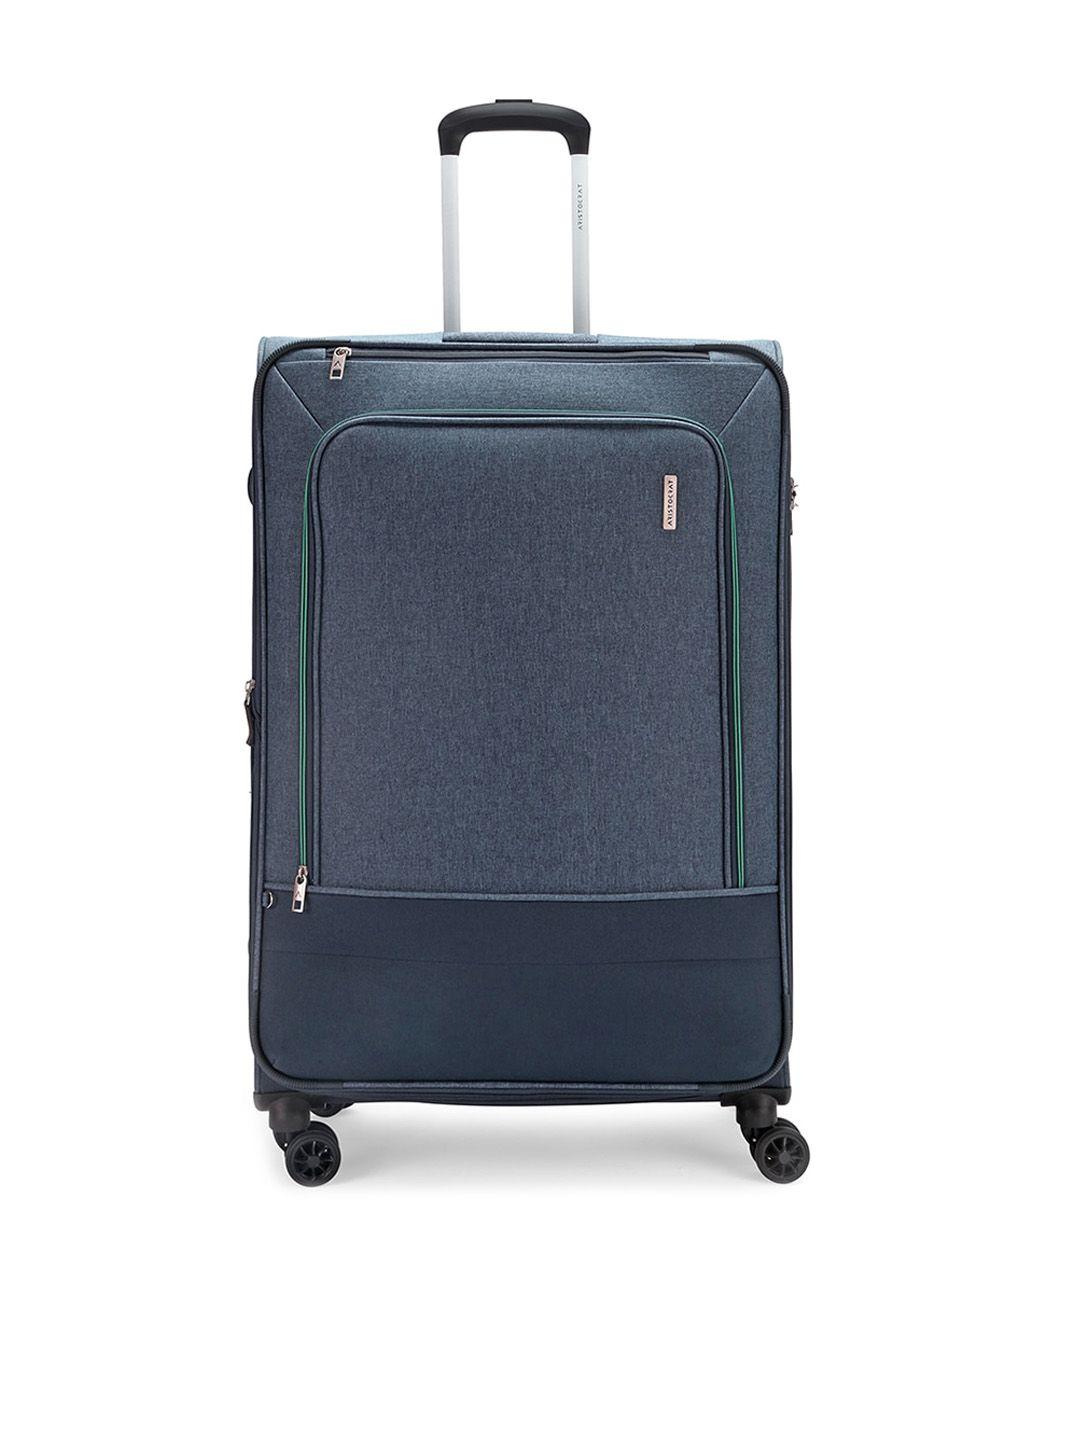 aristocrat soft-sided cabin trolley suitcase